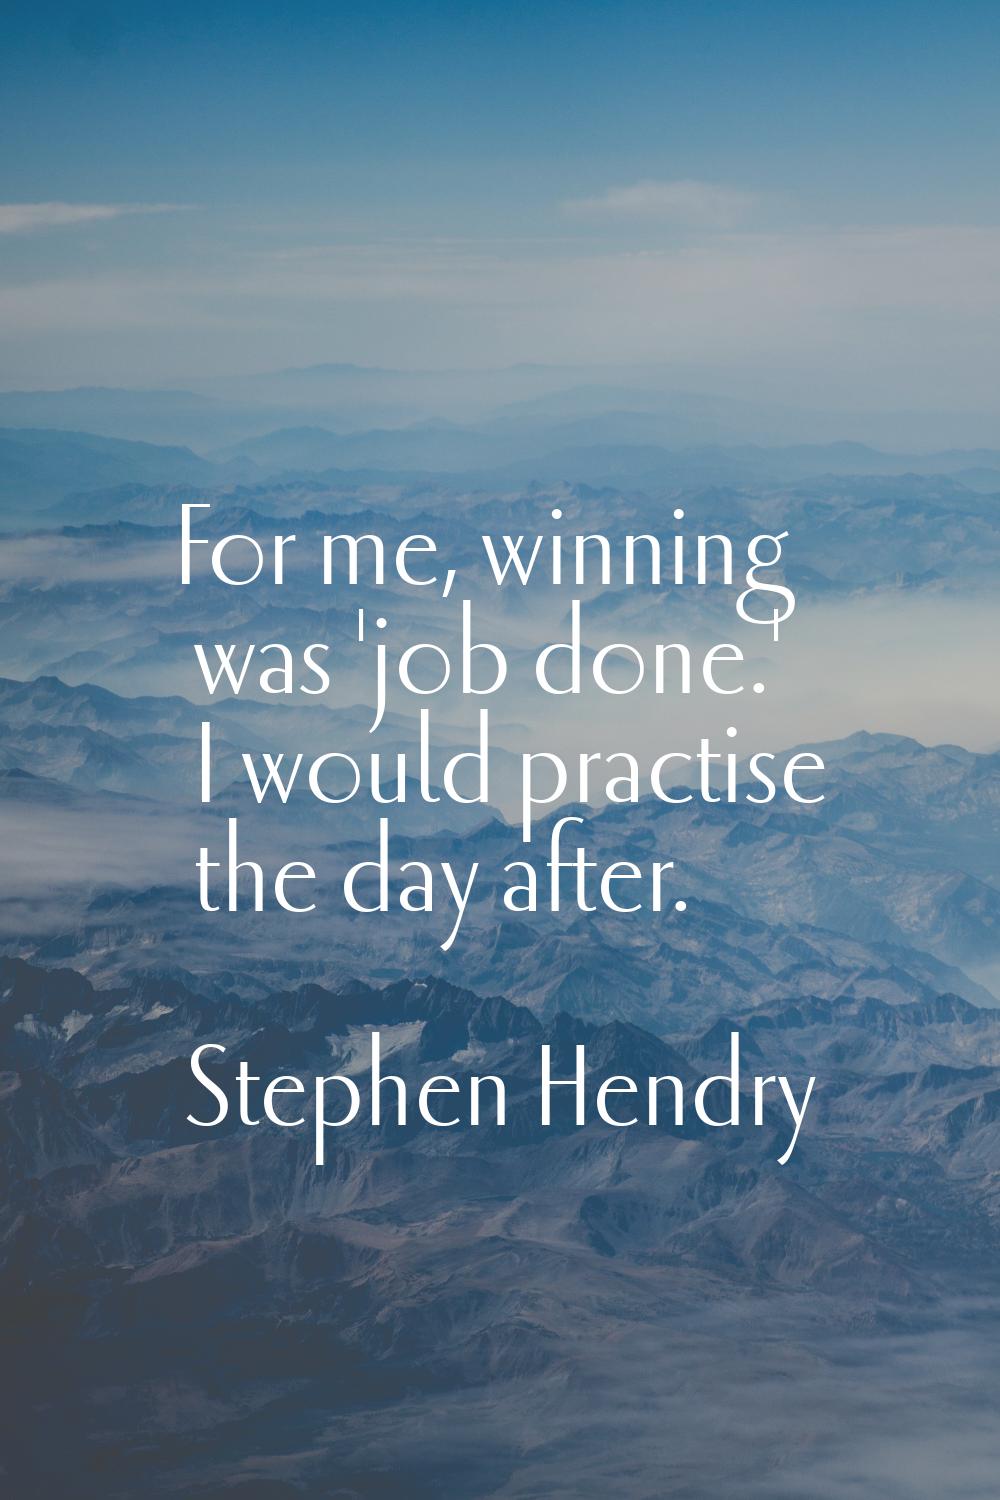 For me, winning was 'job done.' I would practise the day after.